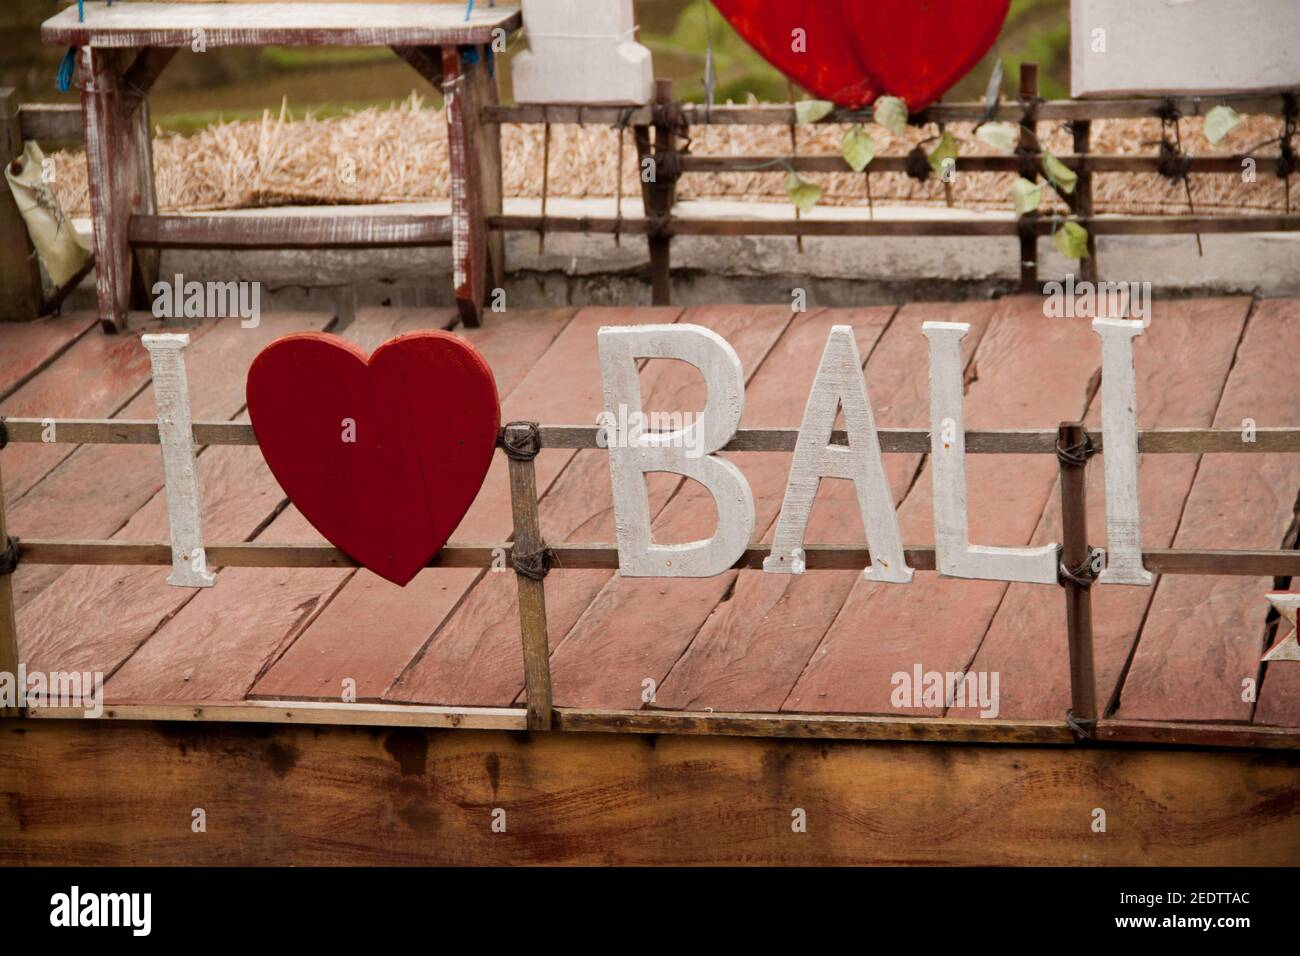 Wooden red and white I Love Bali sign Stock Photo